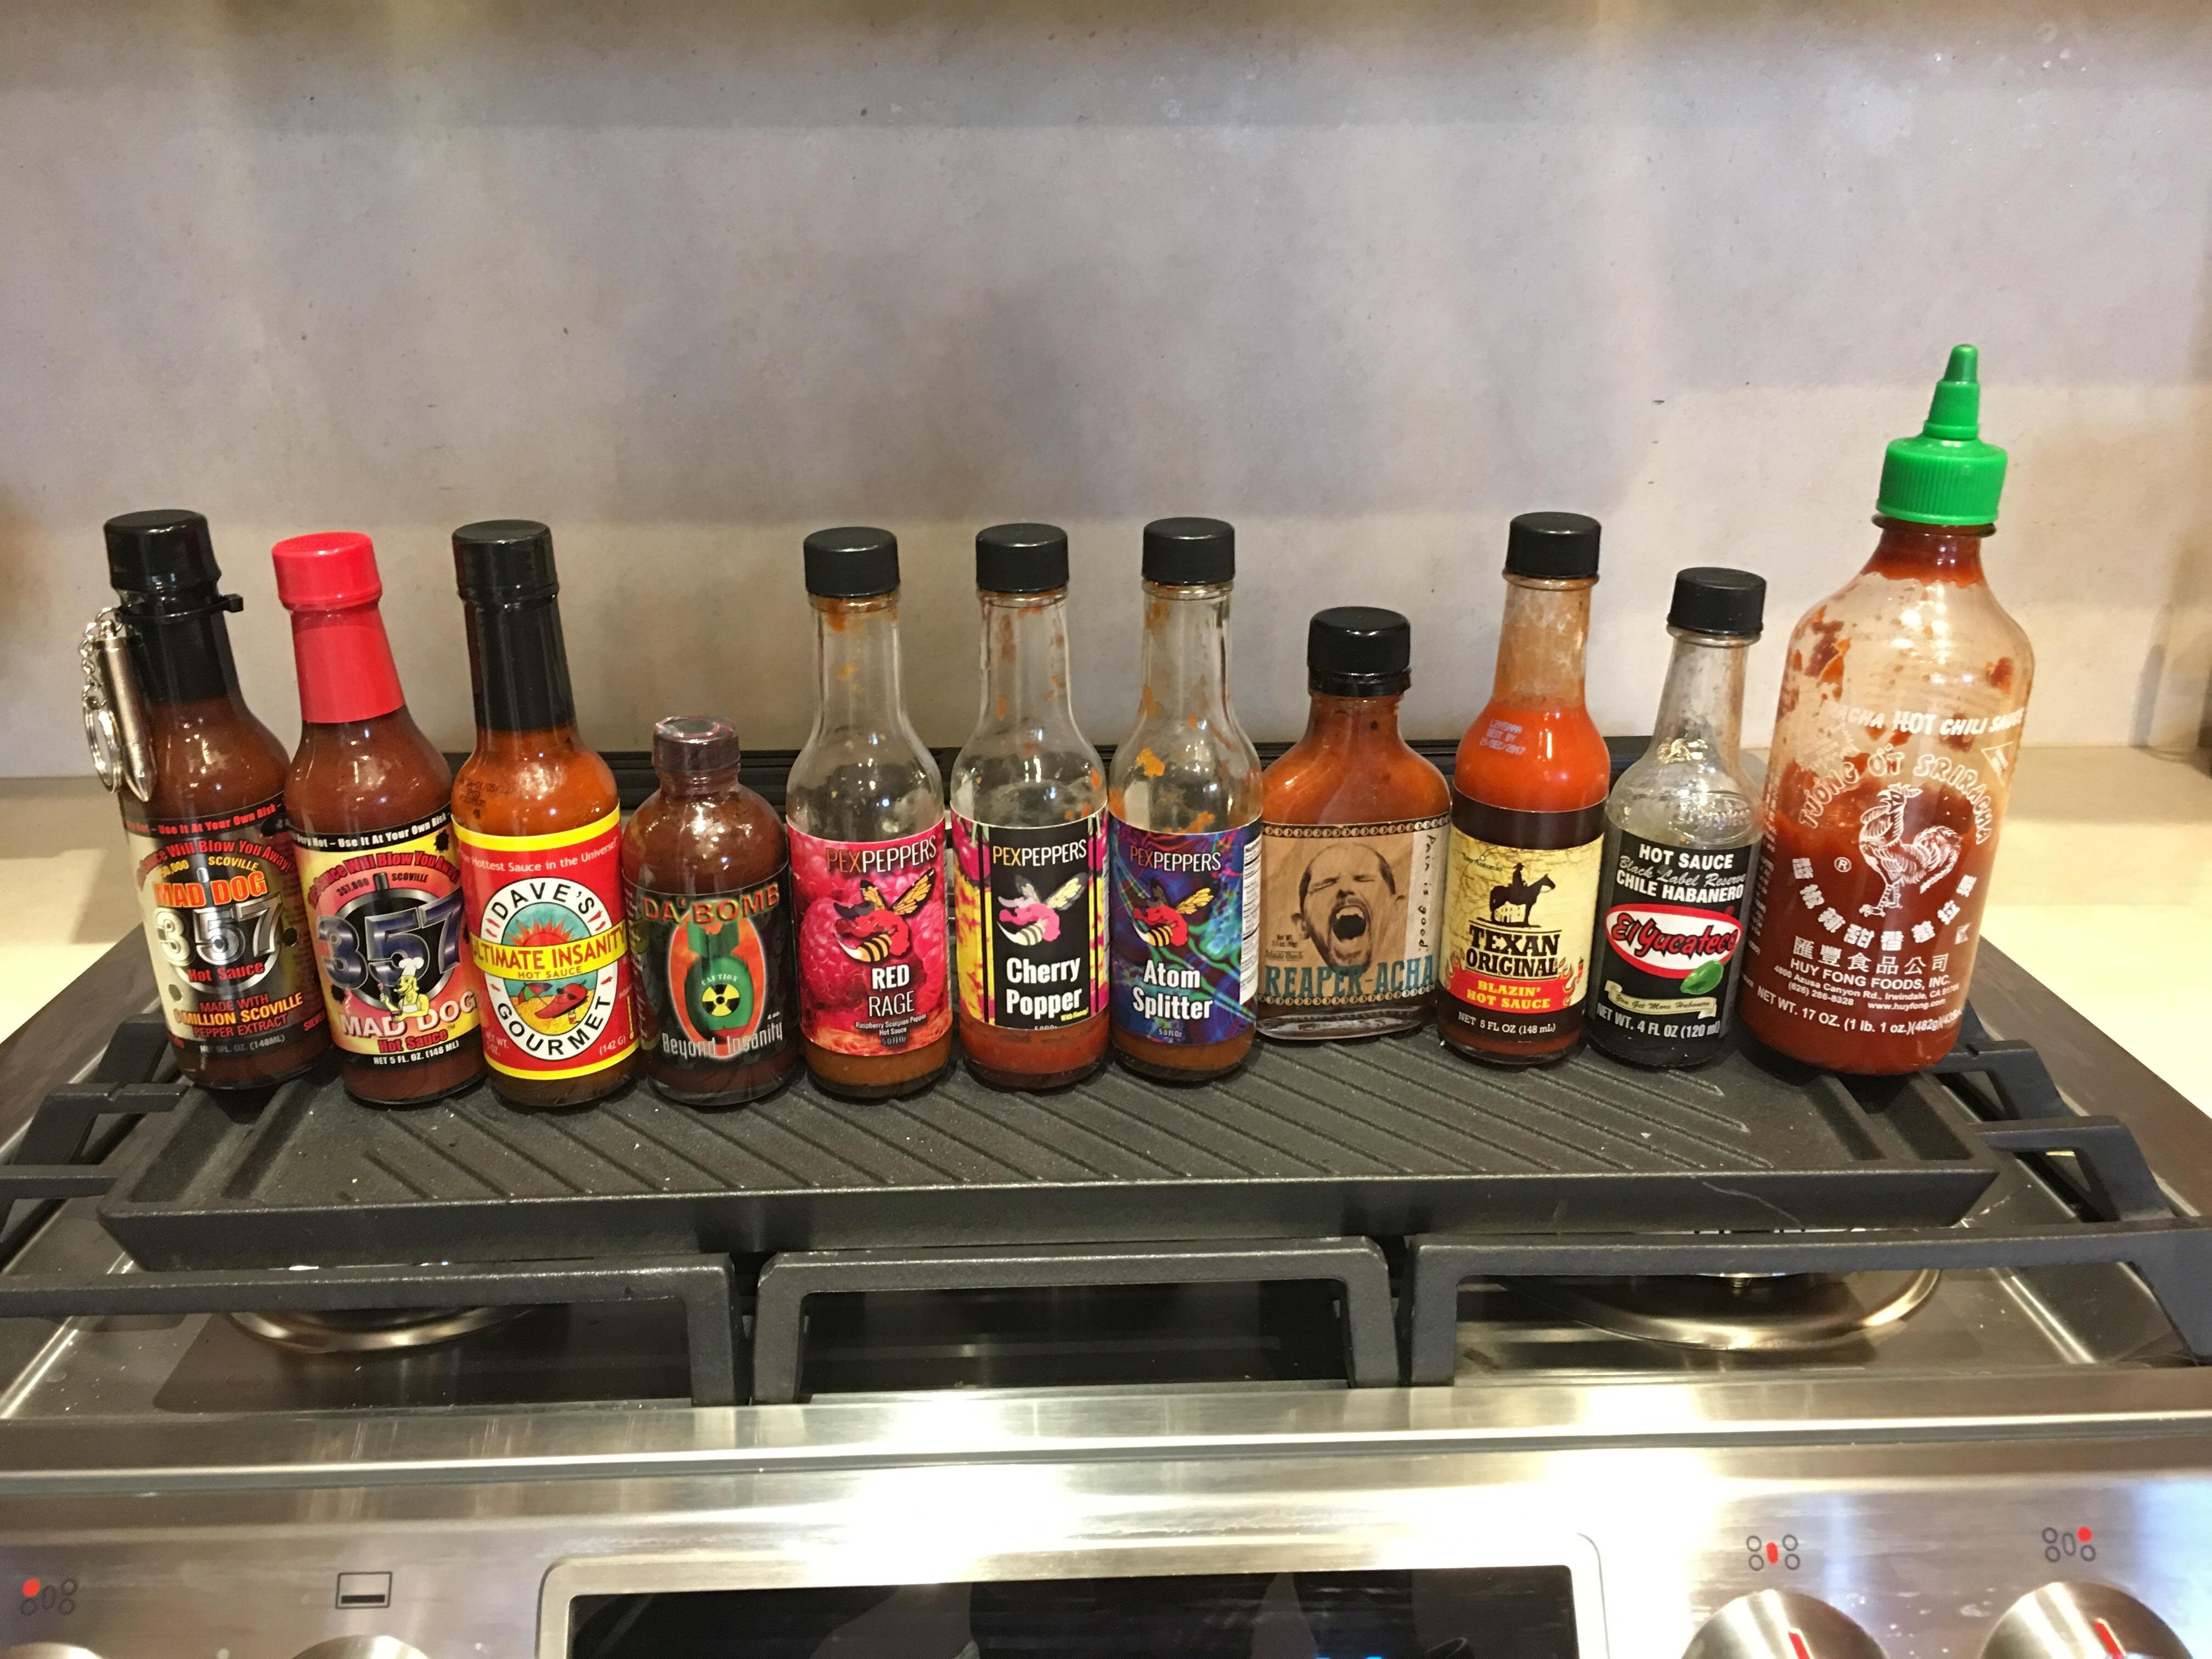 Hot Ones Sauces
 Improvising the hot ones challenge with my buddy u